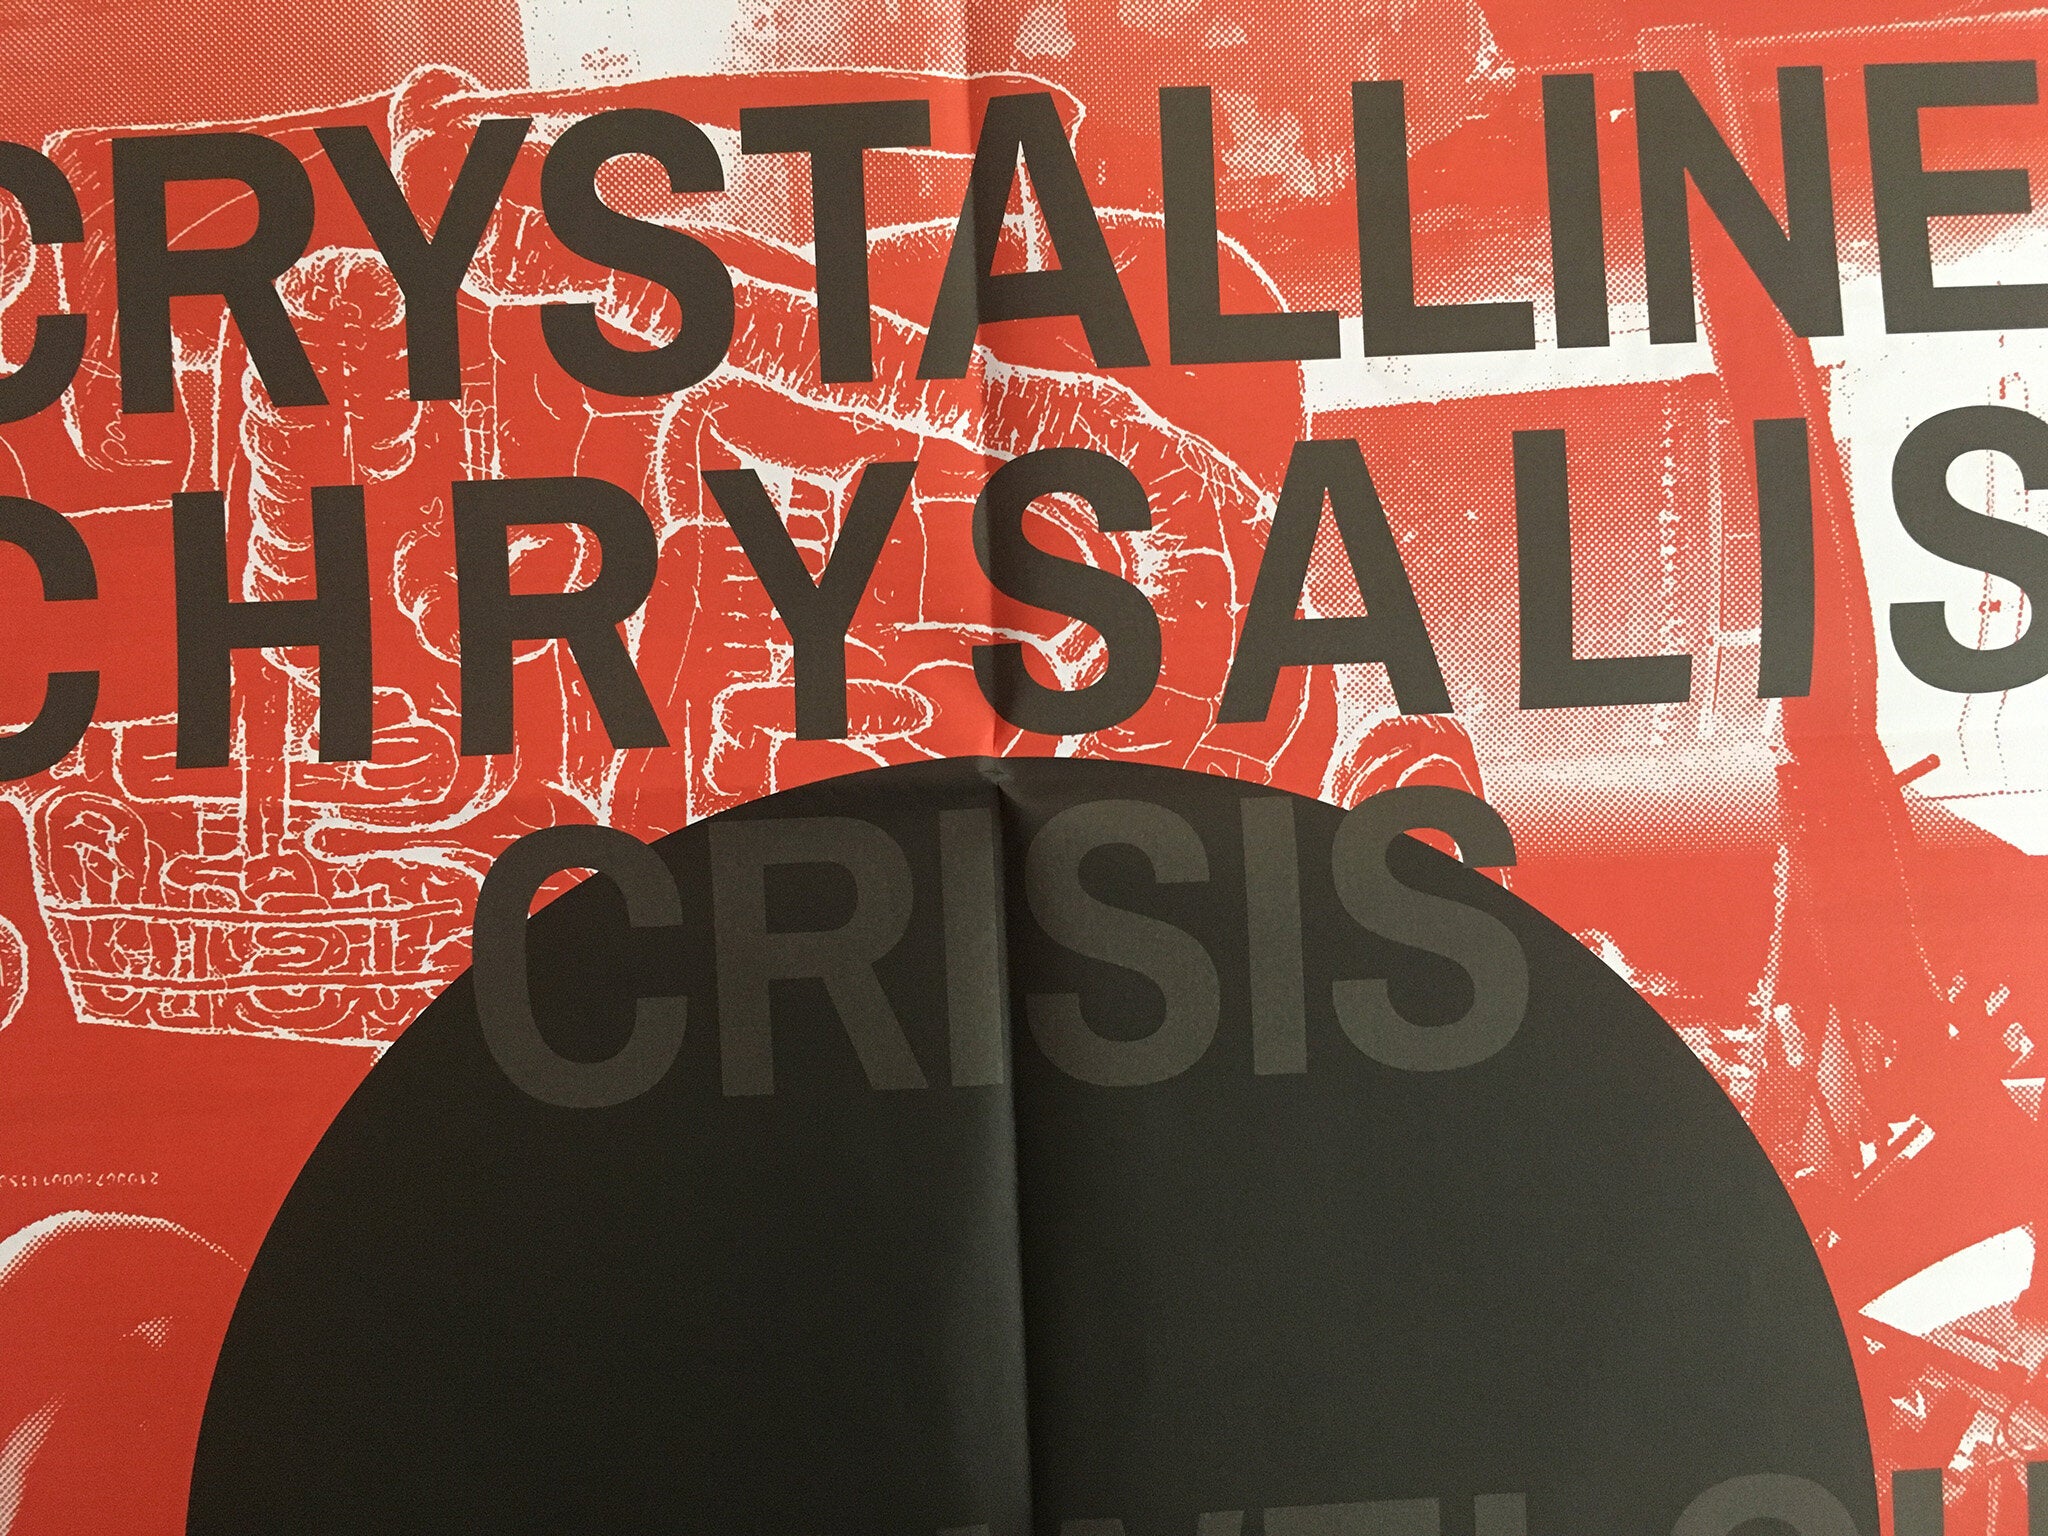 CRYSTALLINE CHRYSALIS CRISIS by Fritz Welch